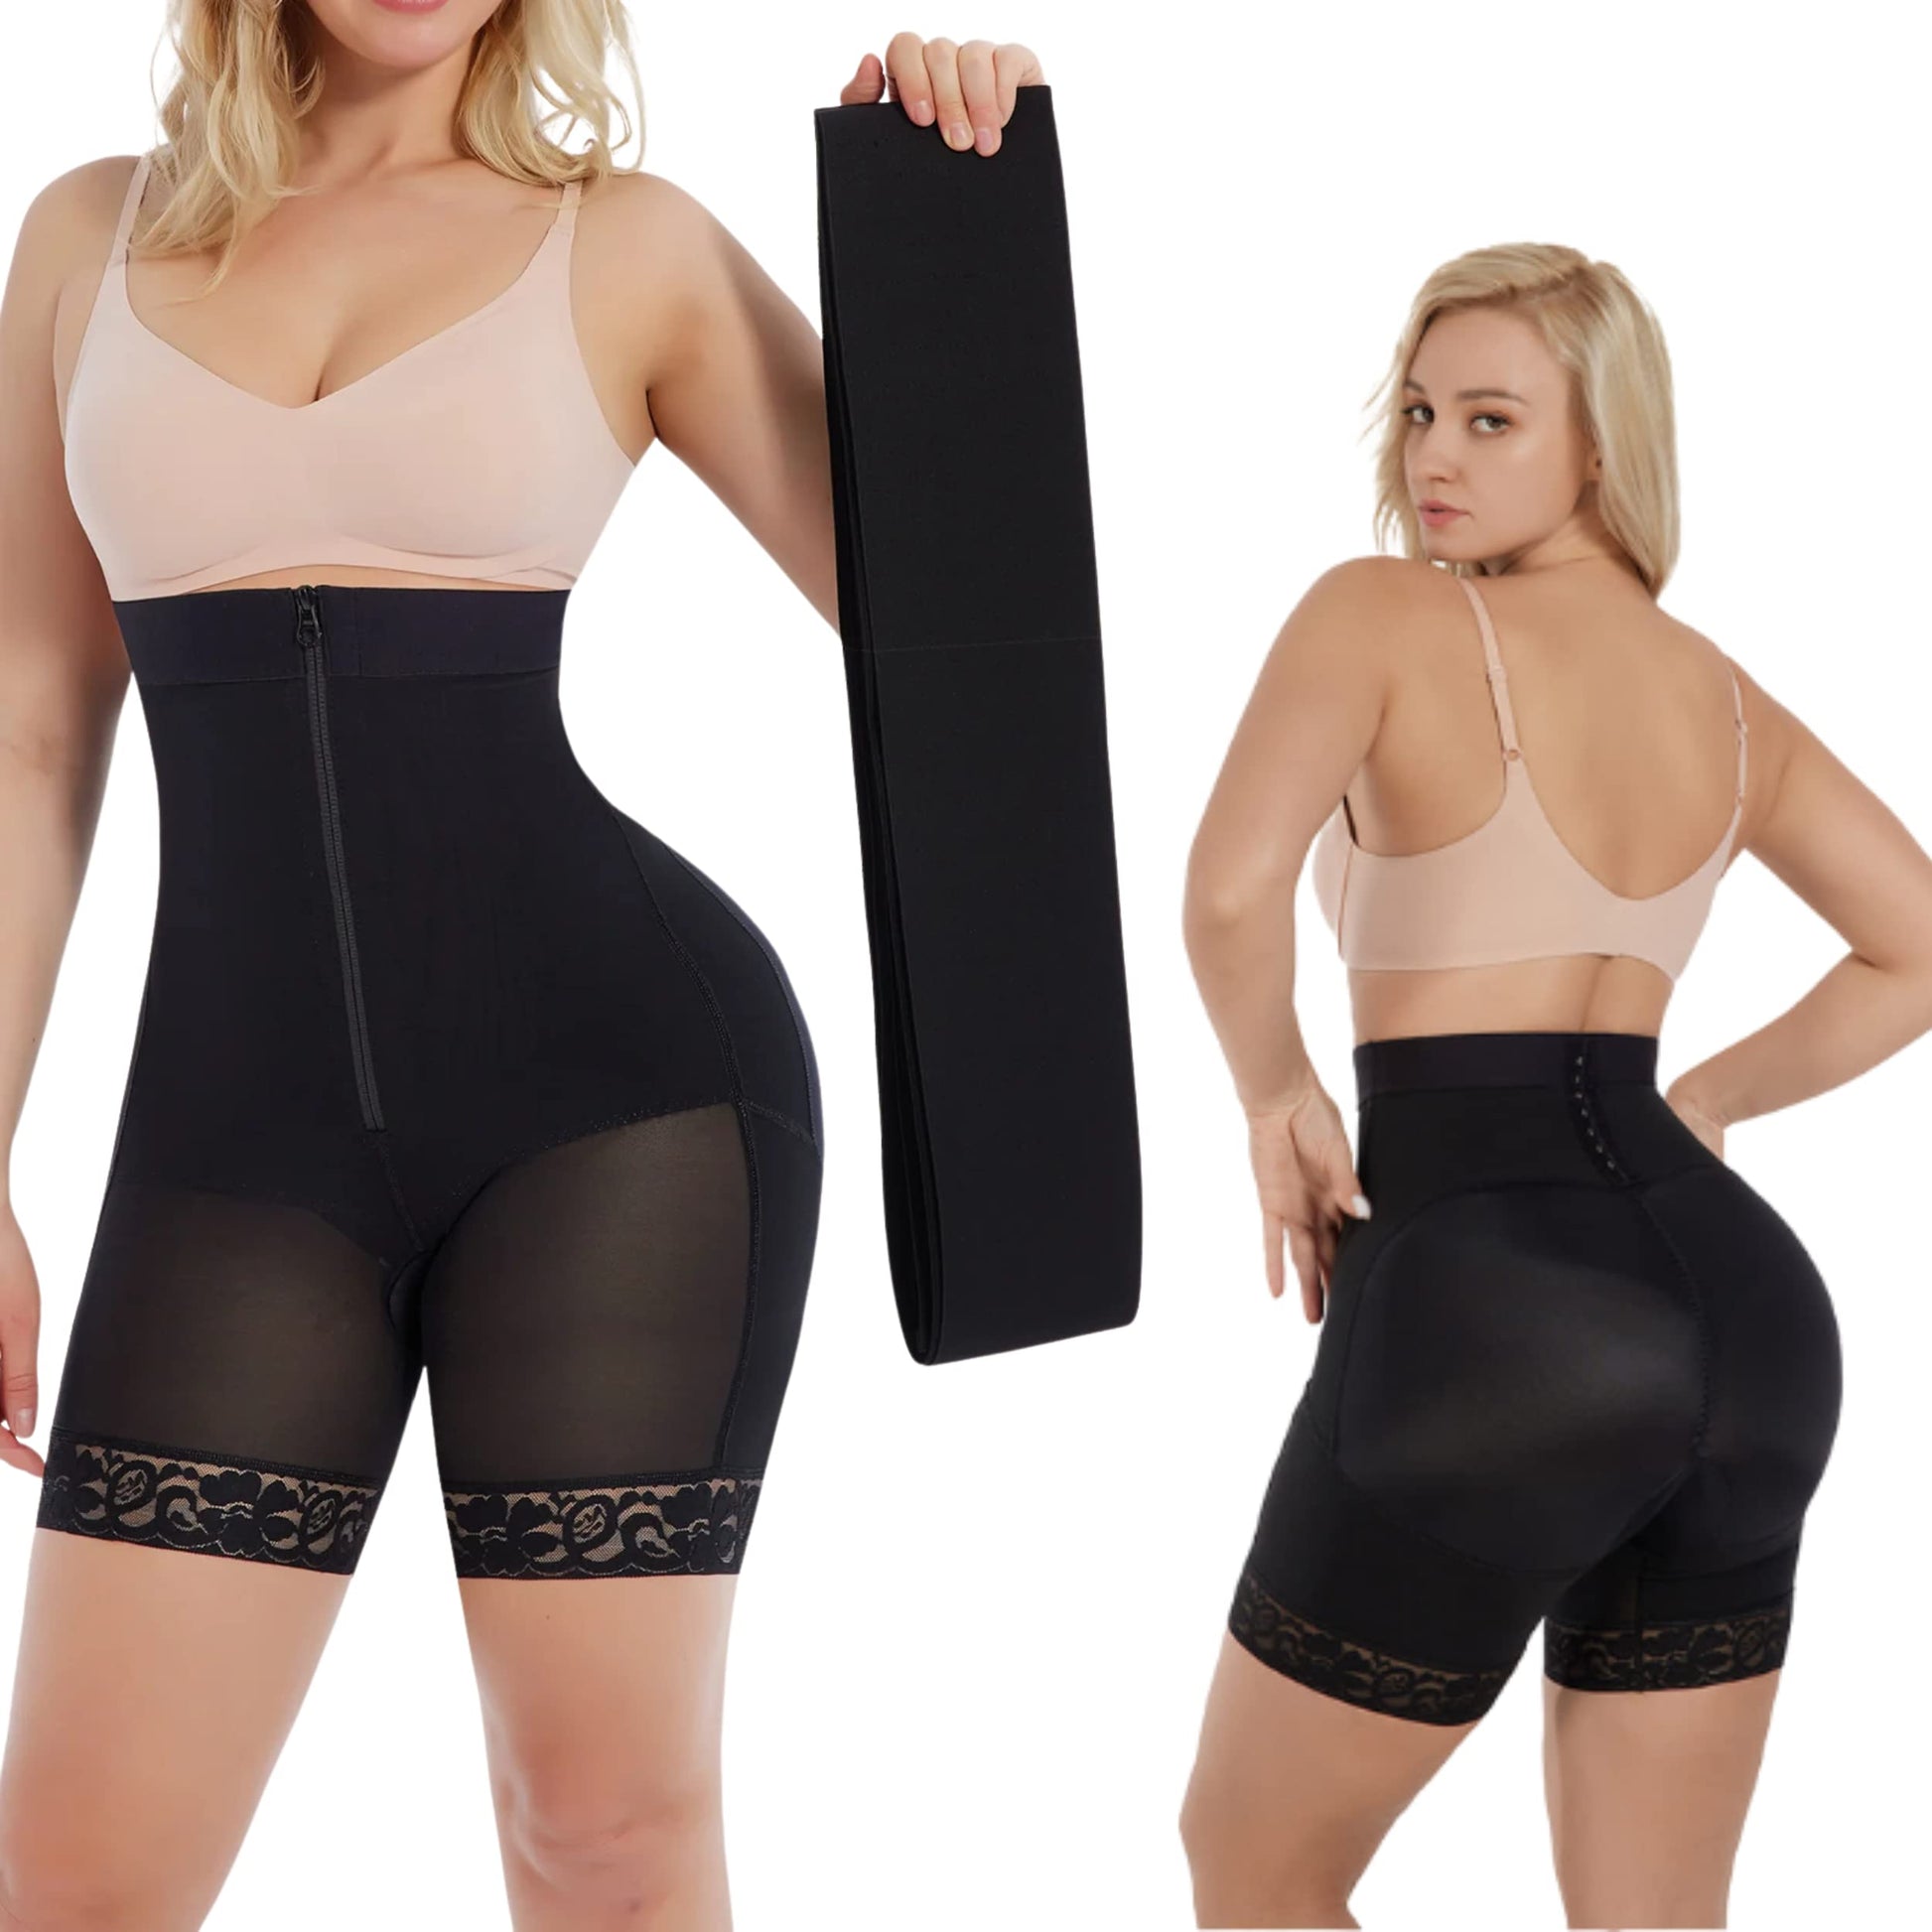 No hip no butt compression – To Be Snatched